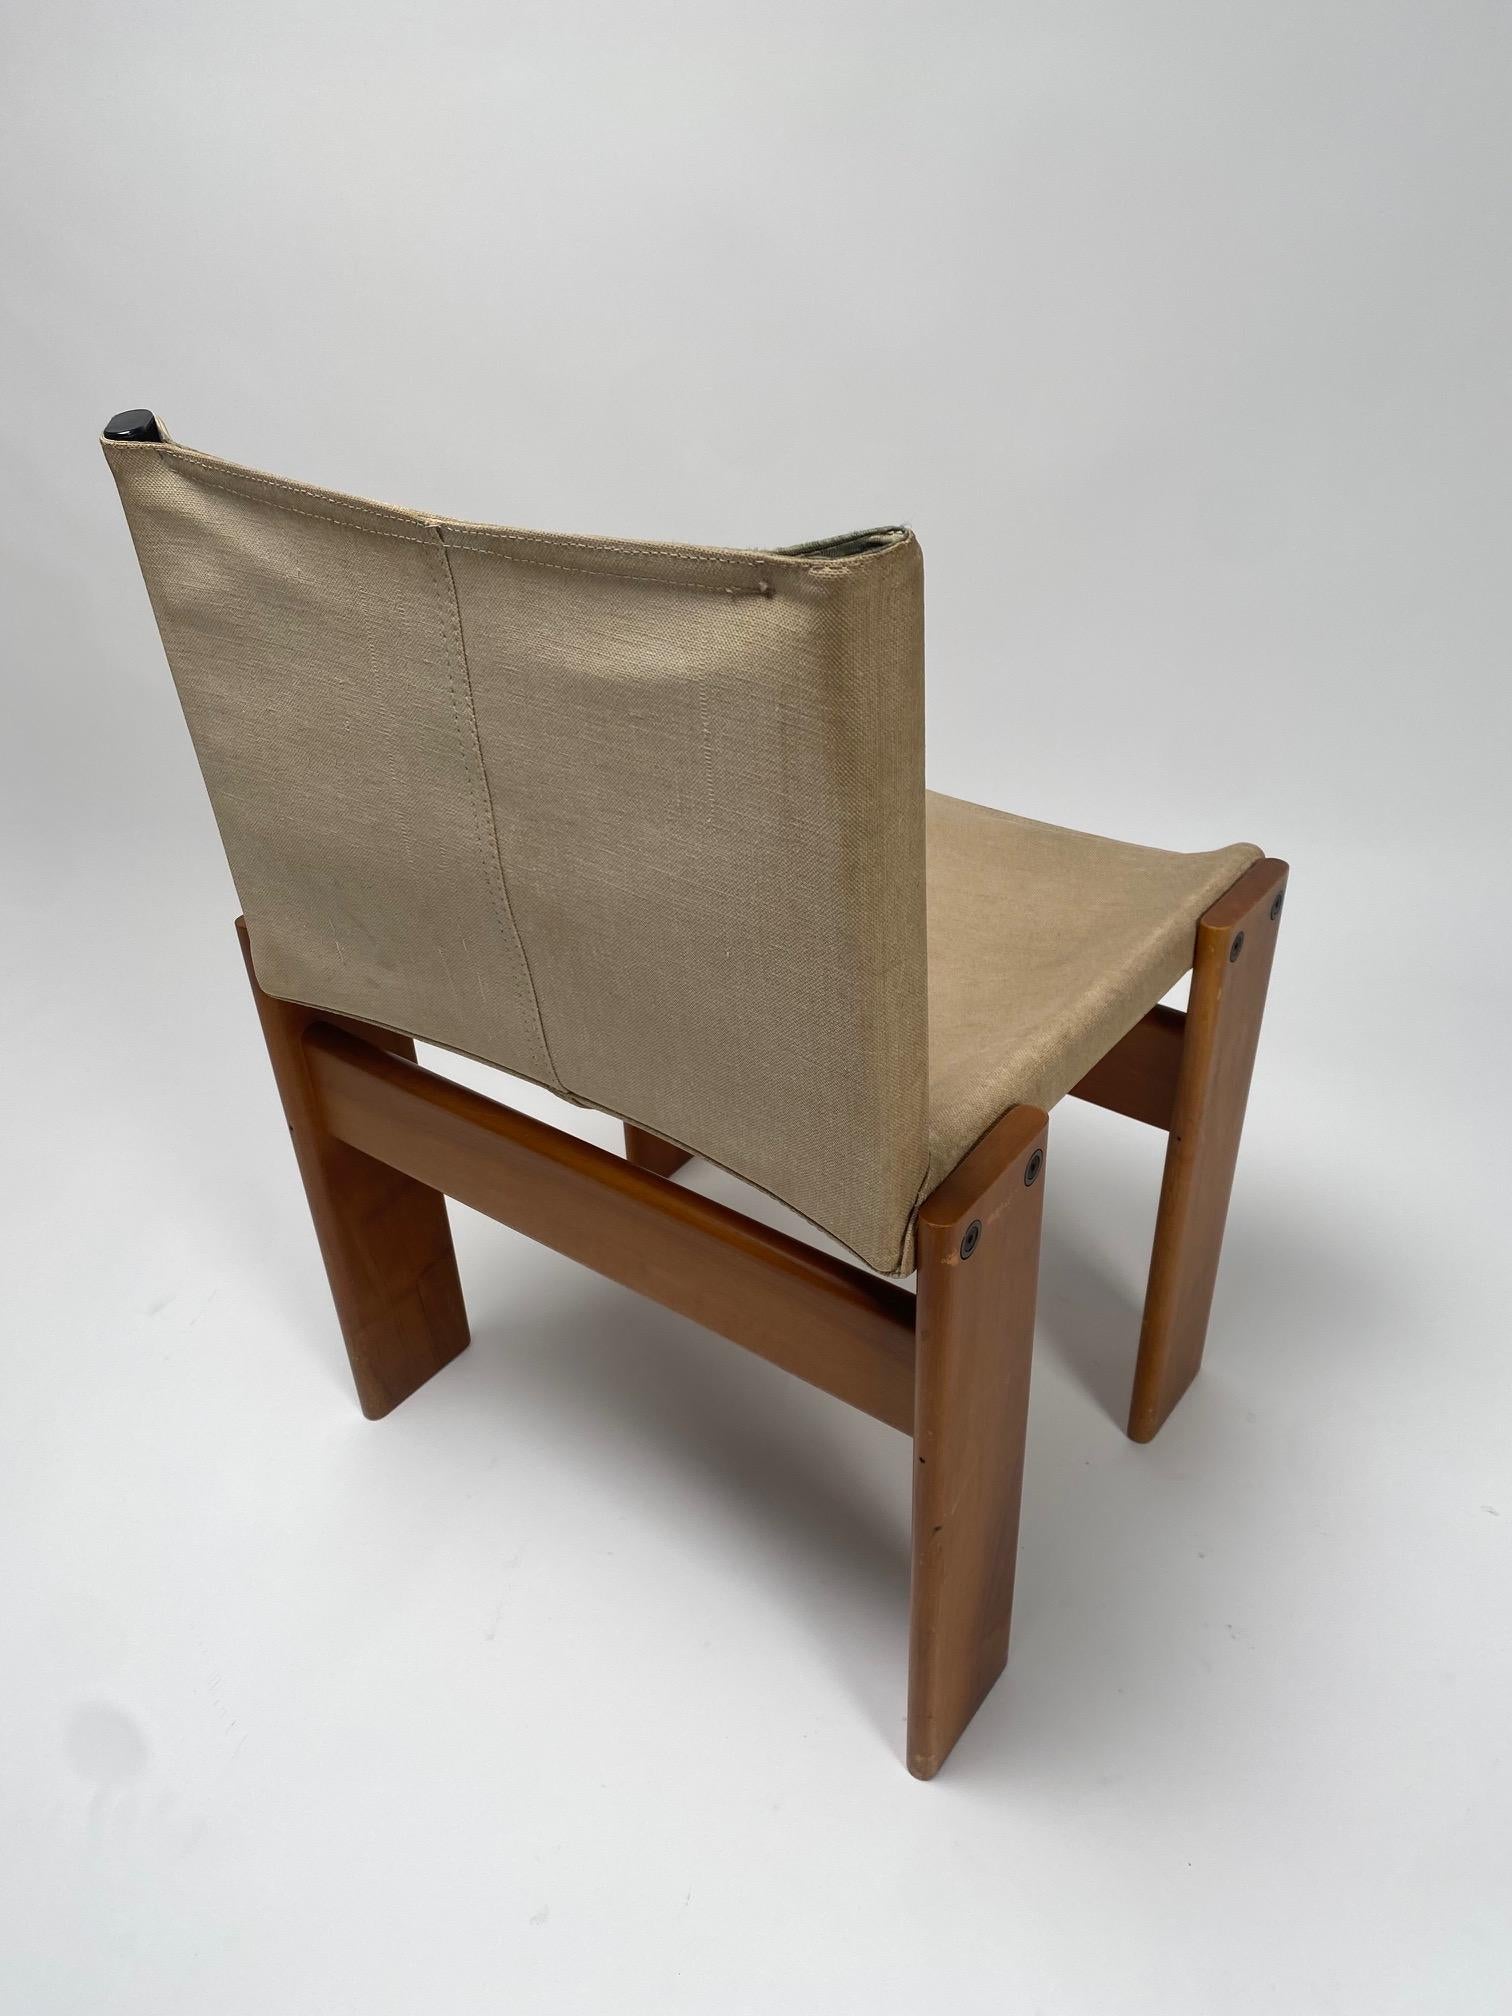 7 'Monk' Chair by Afra & Tobia Scarpa, Molteni, Italy 1974 In Good Condition For Sale In Argelato, BO